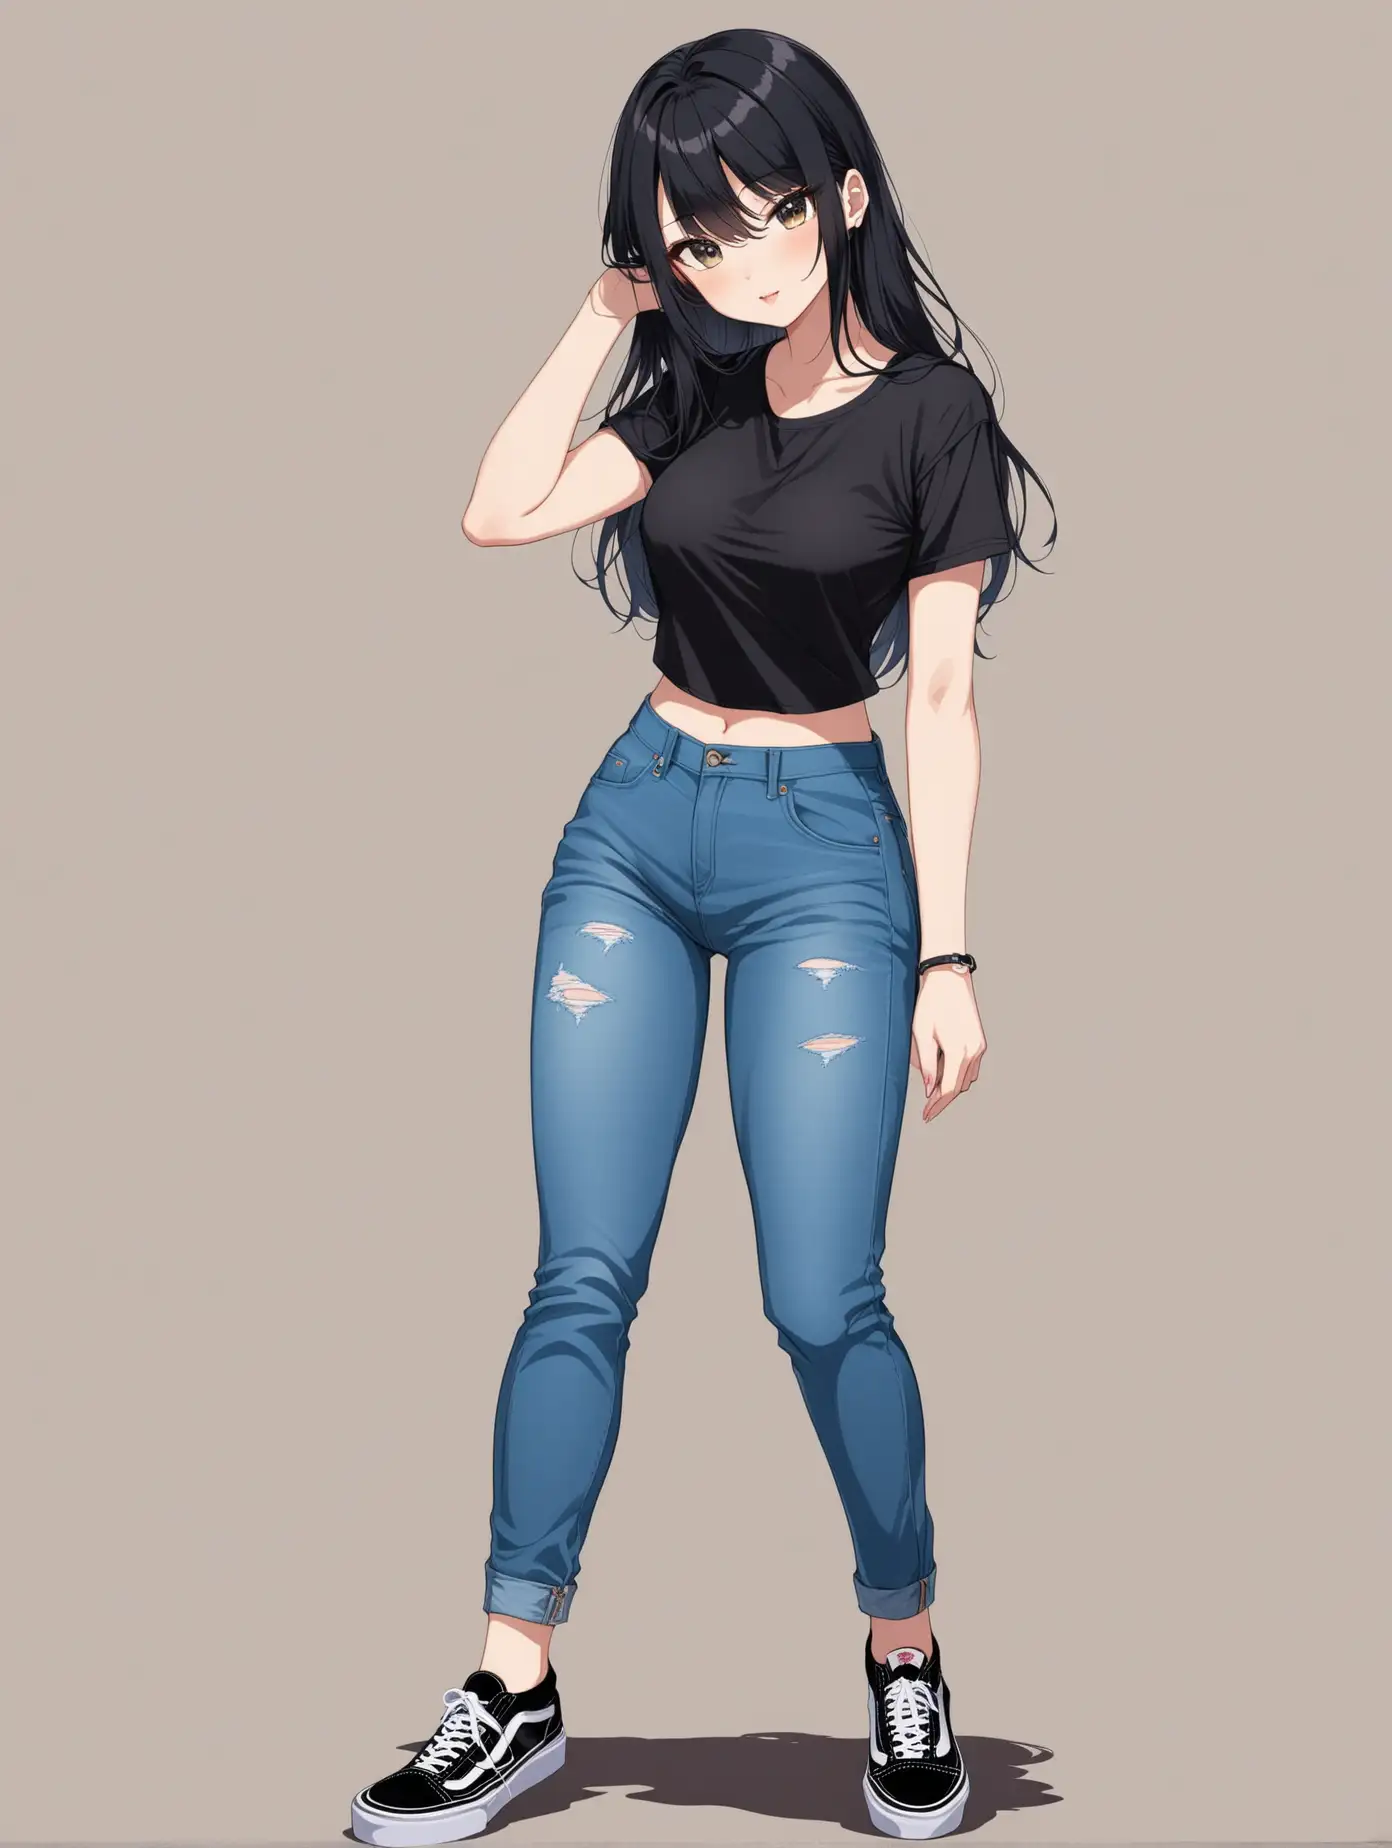 Full body image of a sensual anime black hair hot woman wearing jeans and vans sneakers size 3